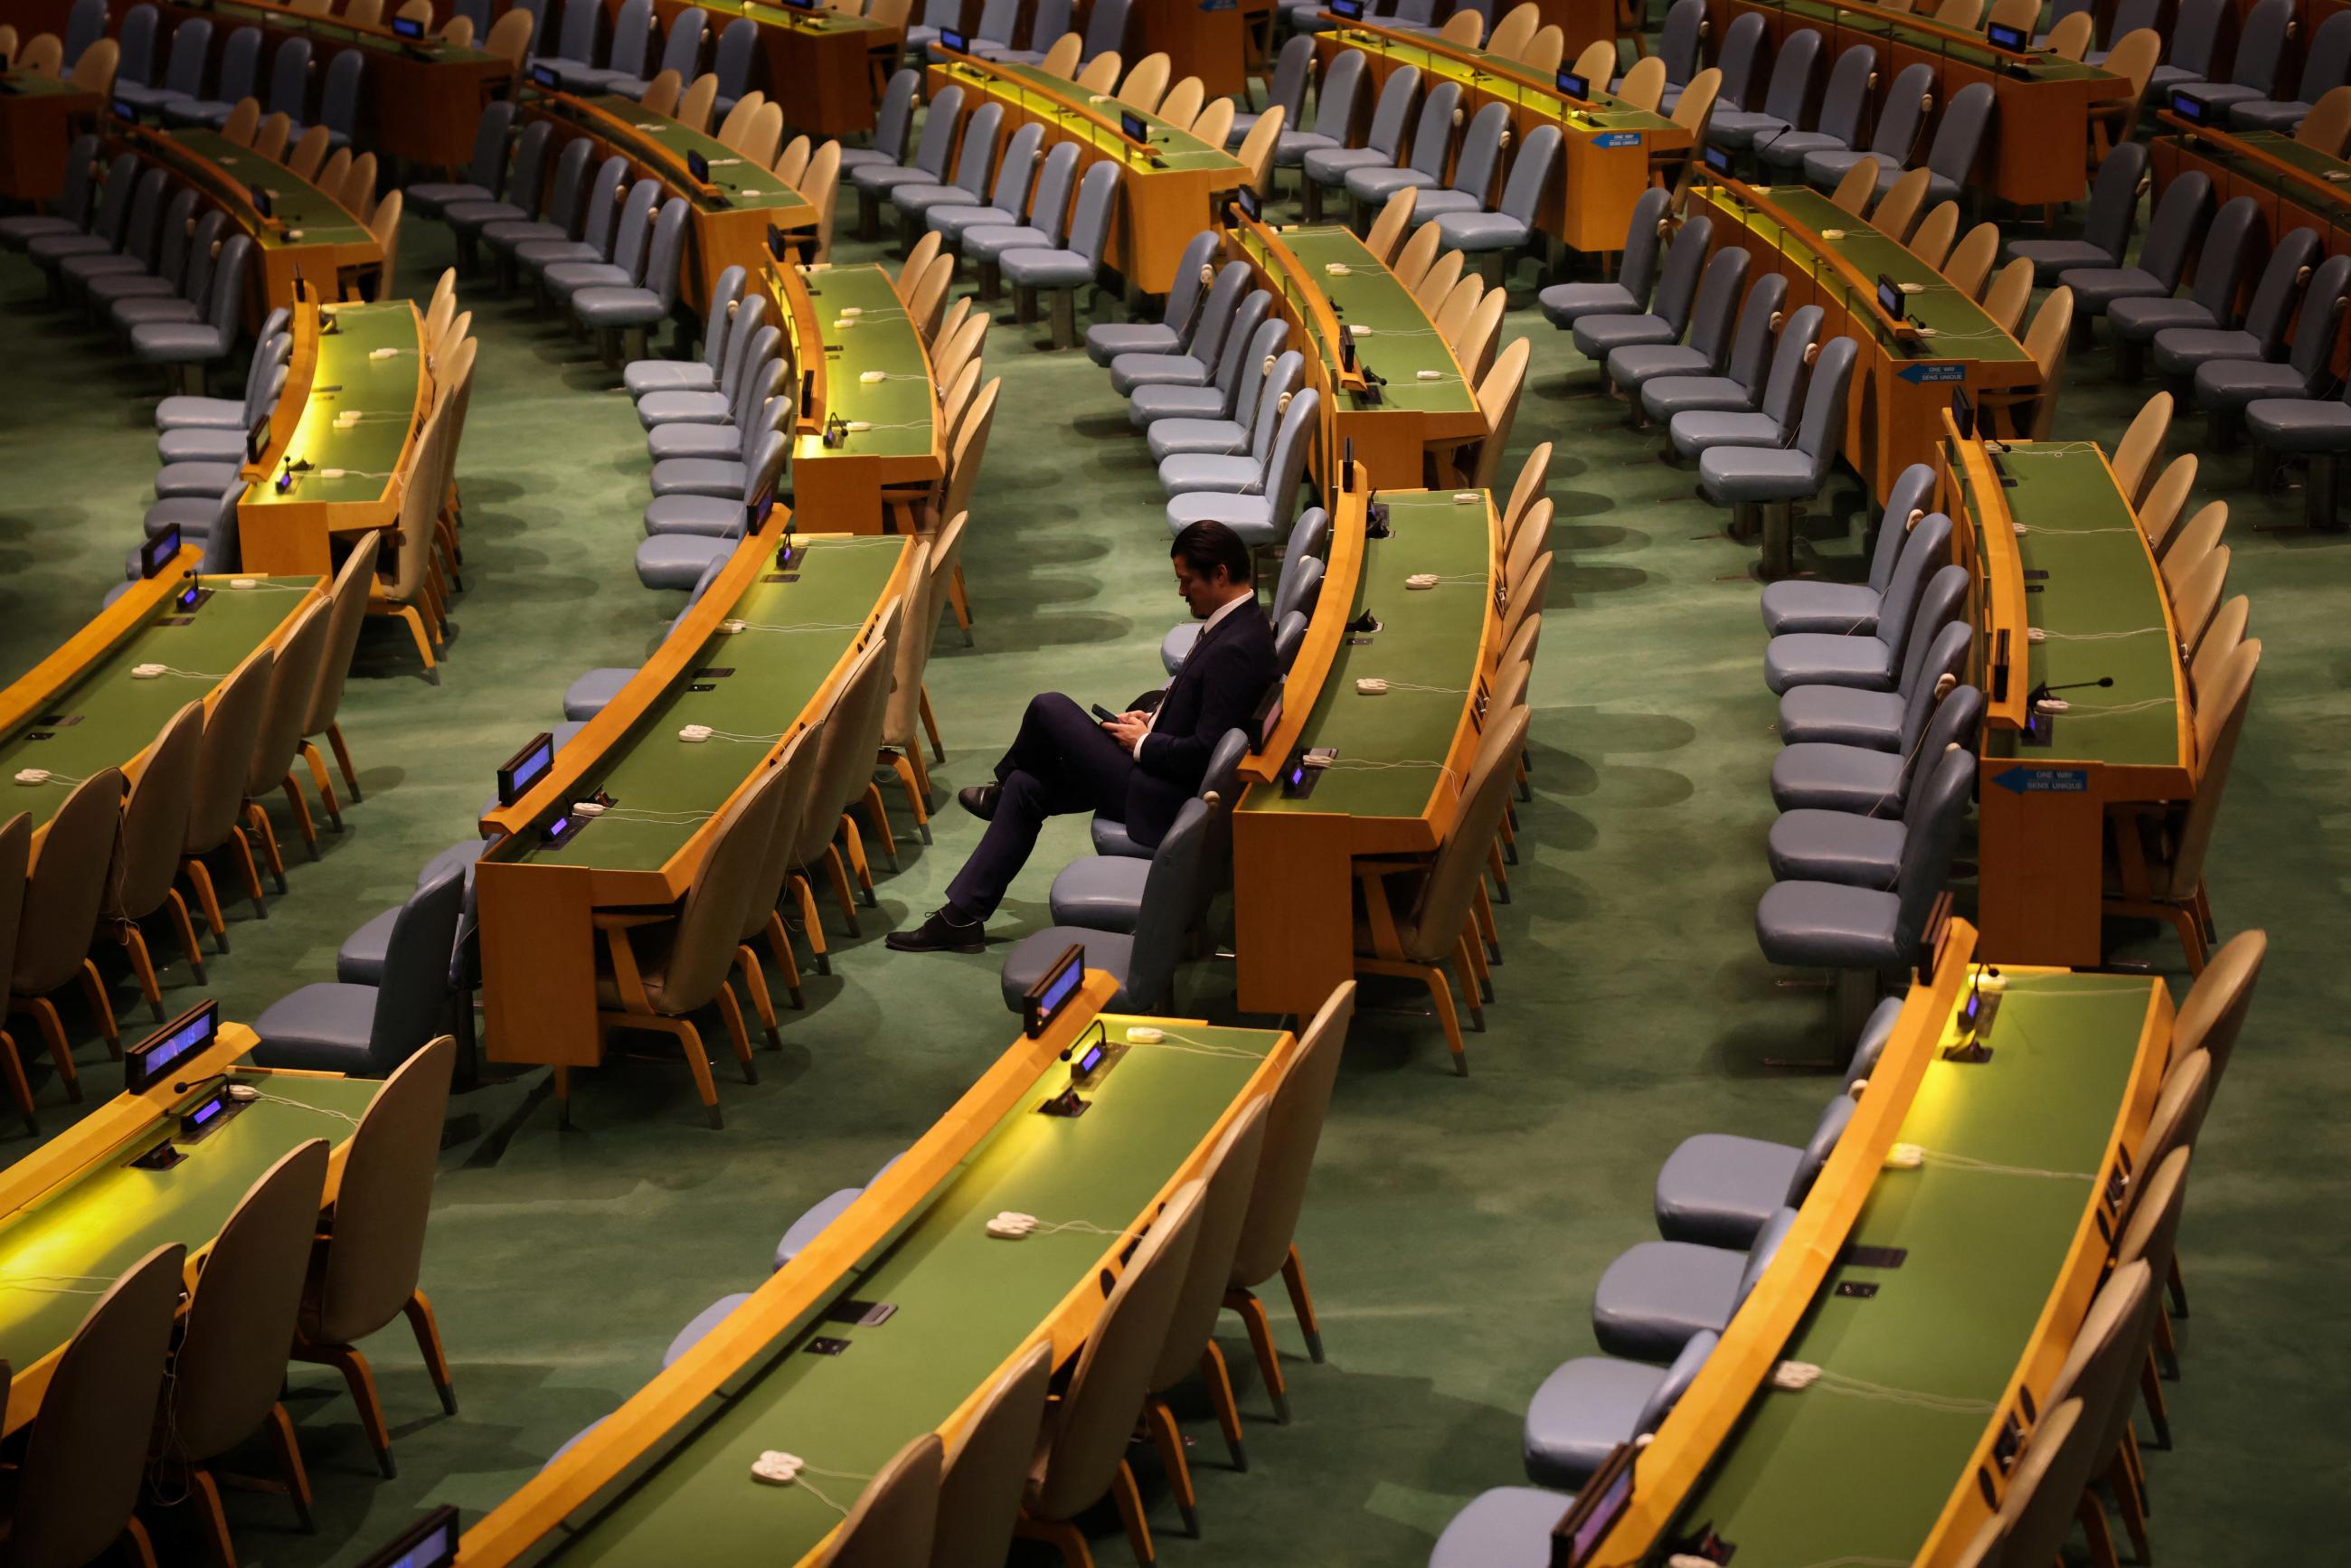 A delegate sits alone ahead of a high-level meeting of the United Nations General Assembly to mark one year since Russia invaded Ukraine and to consider the adoption of a resolution on Ukraine, at U.N. headquarters in New York City, New York, U.S., February 23, 2023.